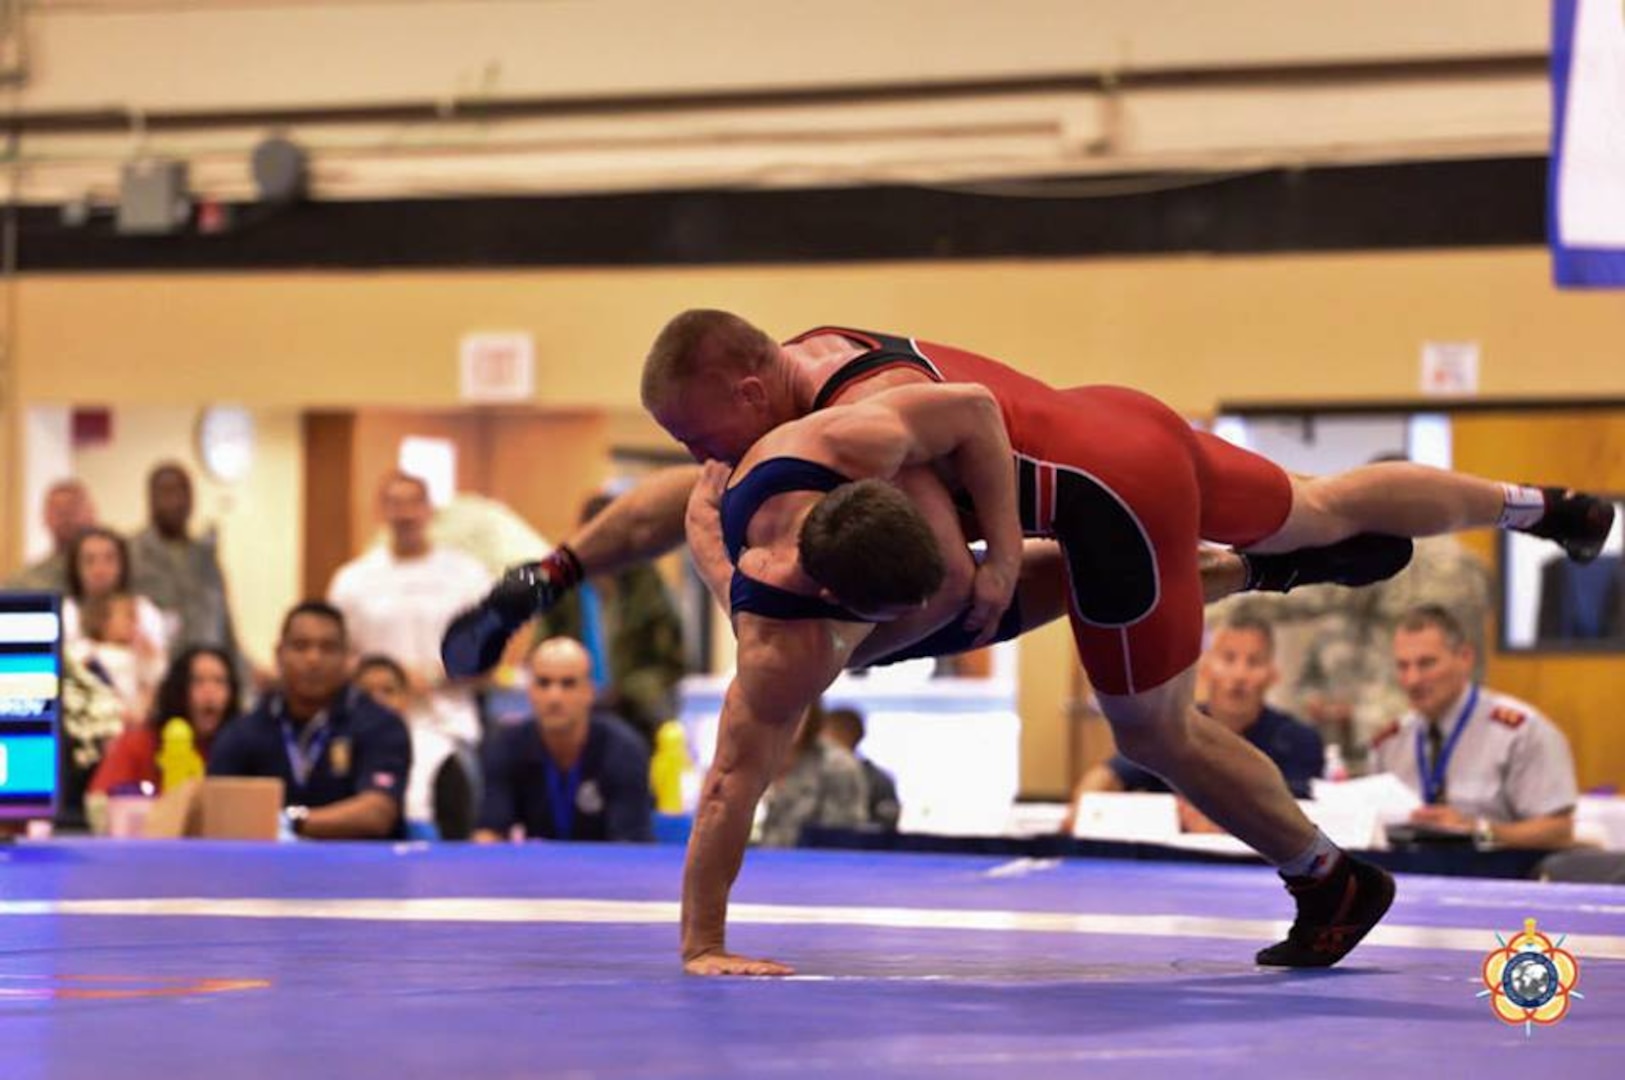 Army Capt. Jon Anderson during his silver medal performance in the 75kg Greco-Roman competition at the 29th CISM World Military Wrestling Championship at Joint Base McGuire-Dix-Lakehurst, NJ 1-8 October 2014.